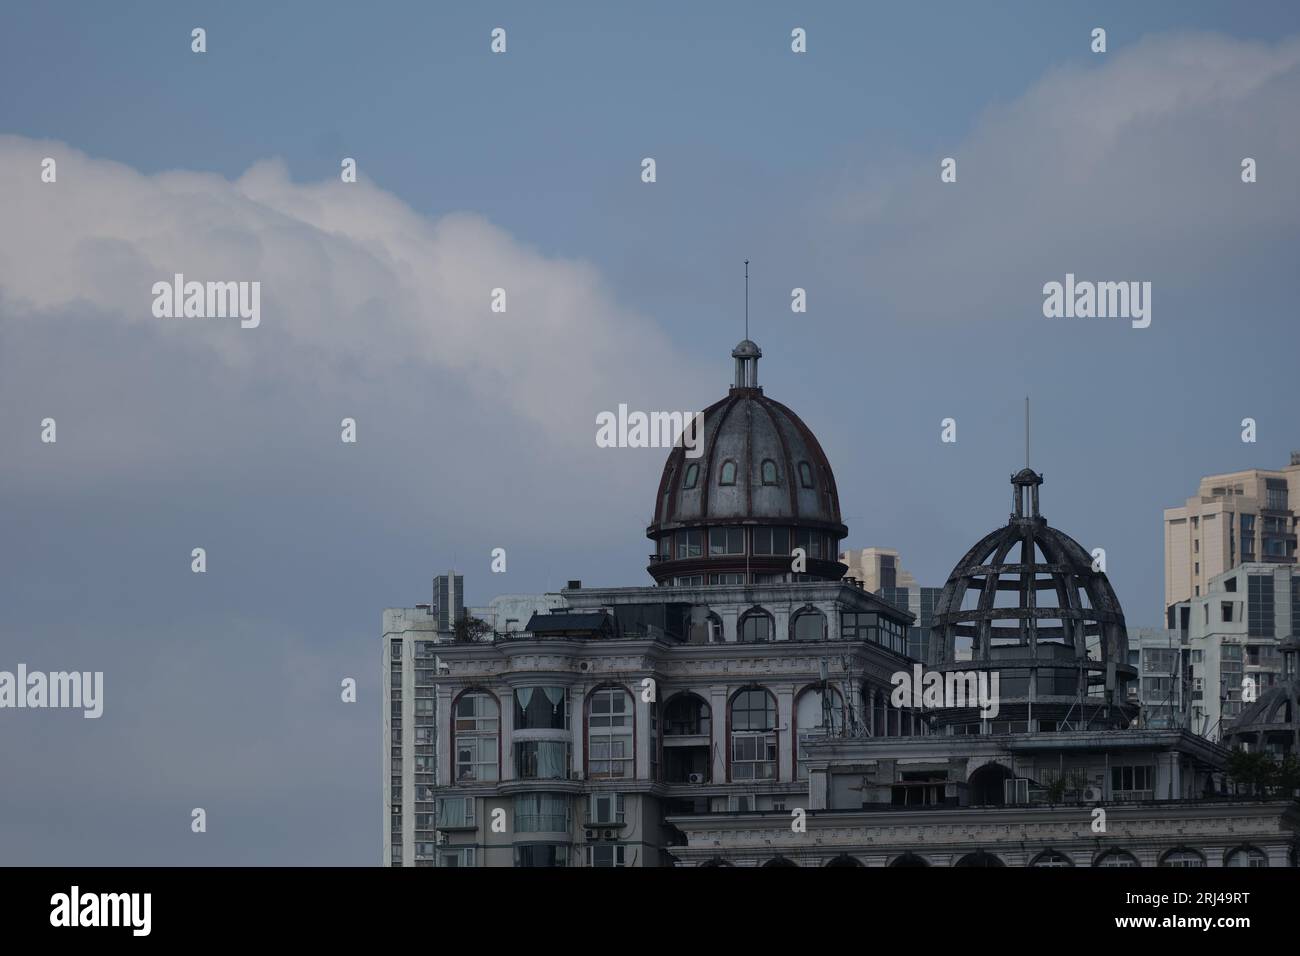 An old weathered building with a domed roof in the city skyline Stock Photo